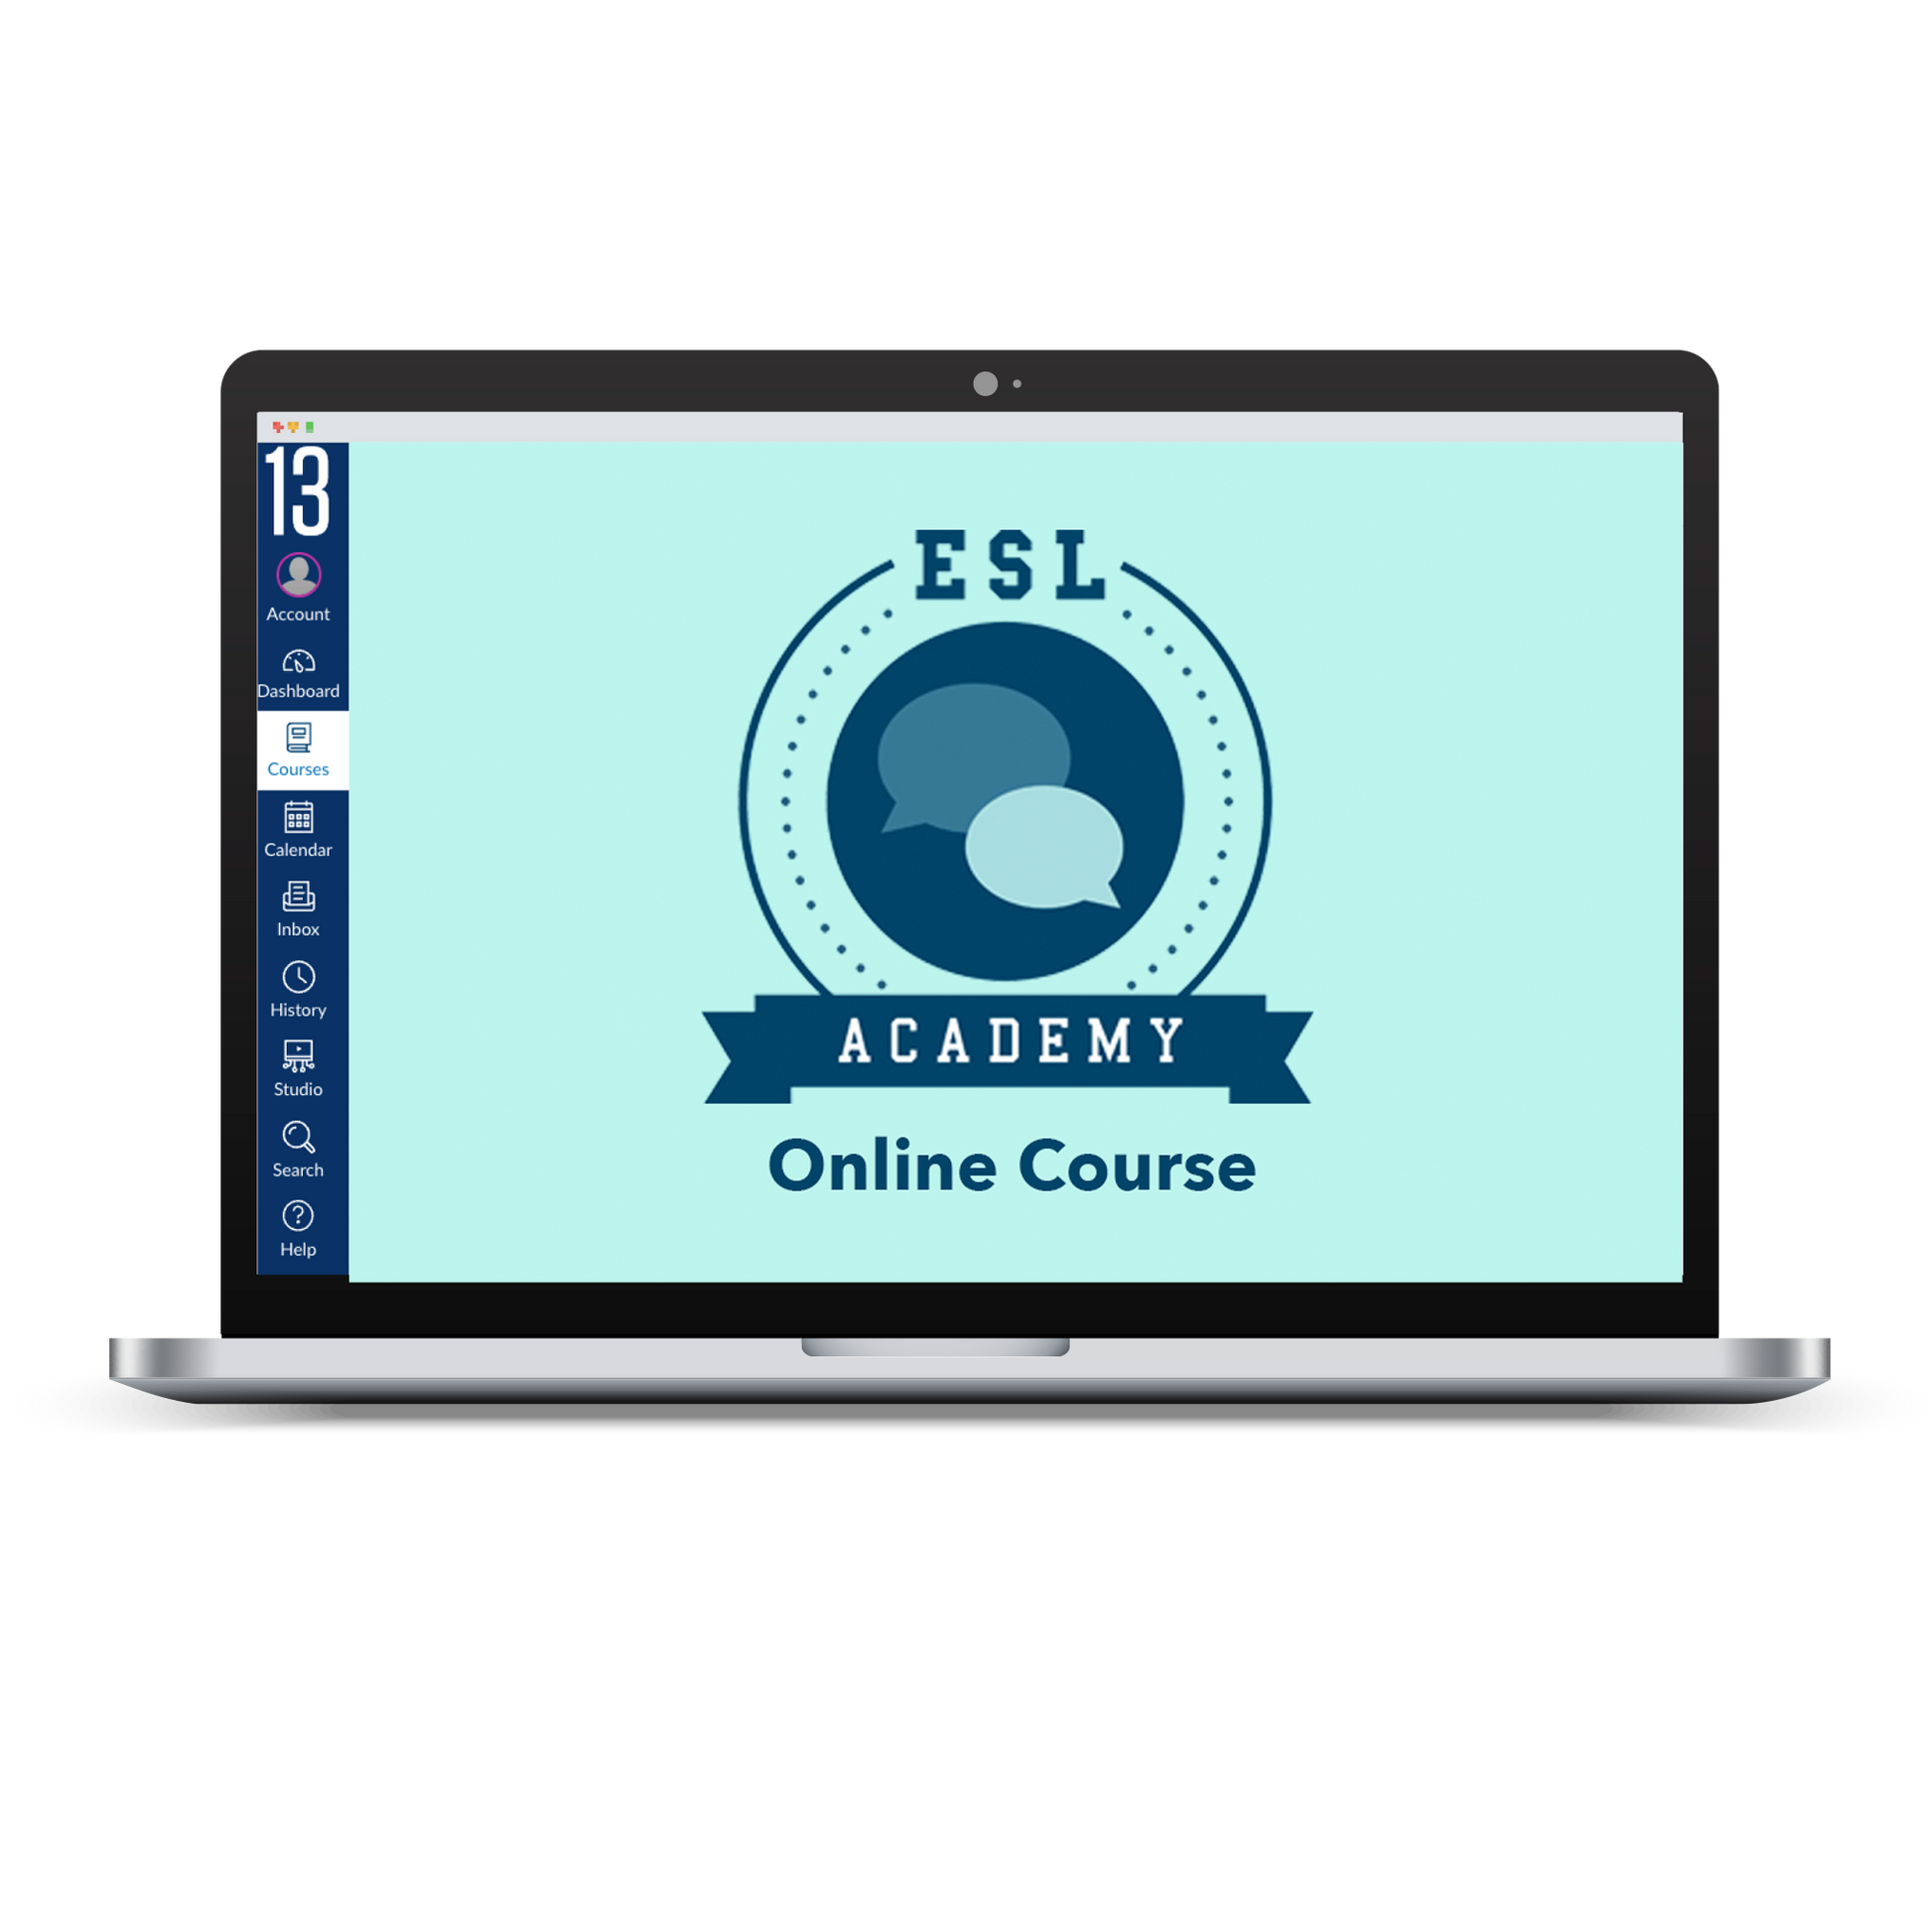 Laptop screen displaying a preview of the online course ESL Academy on the Canvas platform.